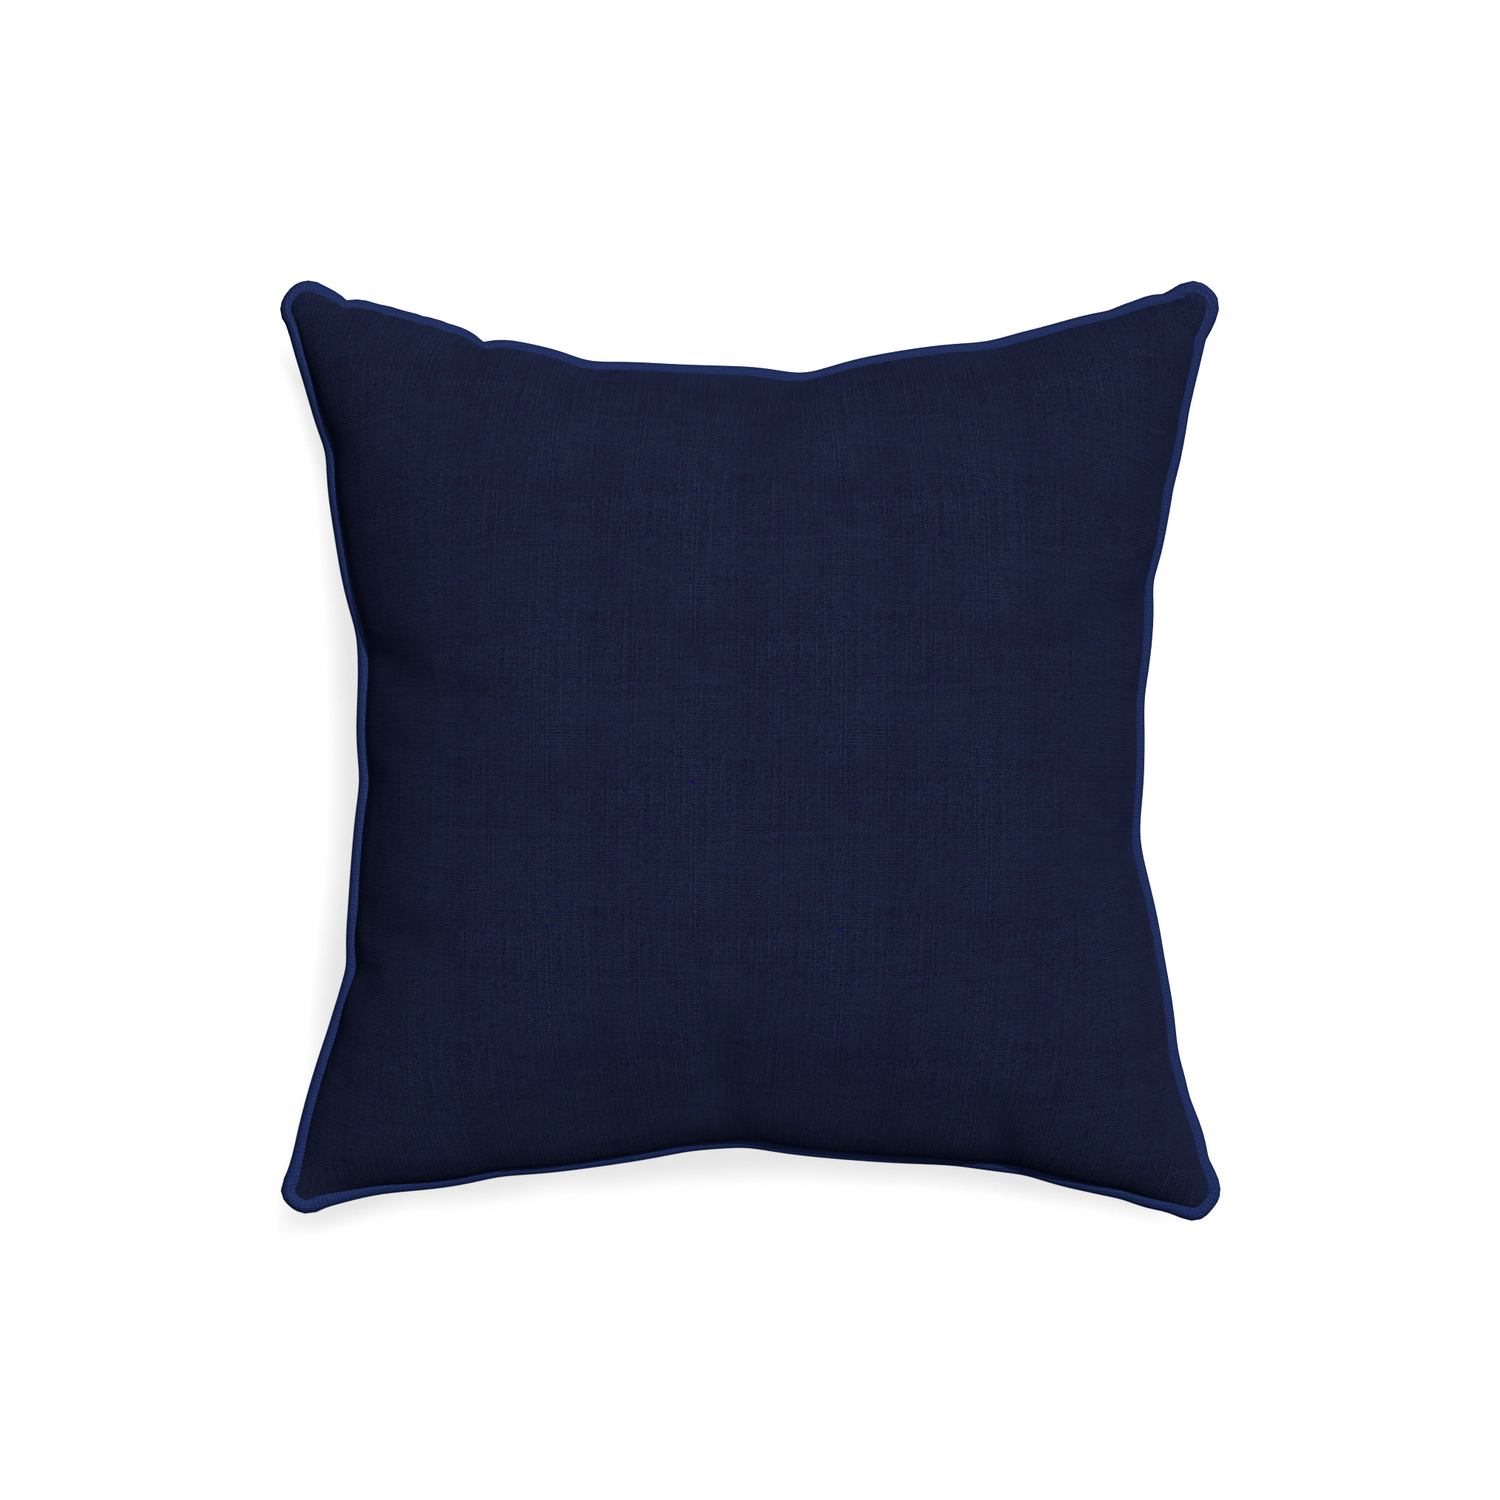 20-square midnight custom navy bluepillow with midnight piping on white background